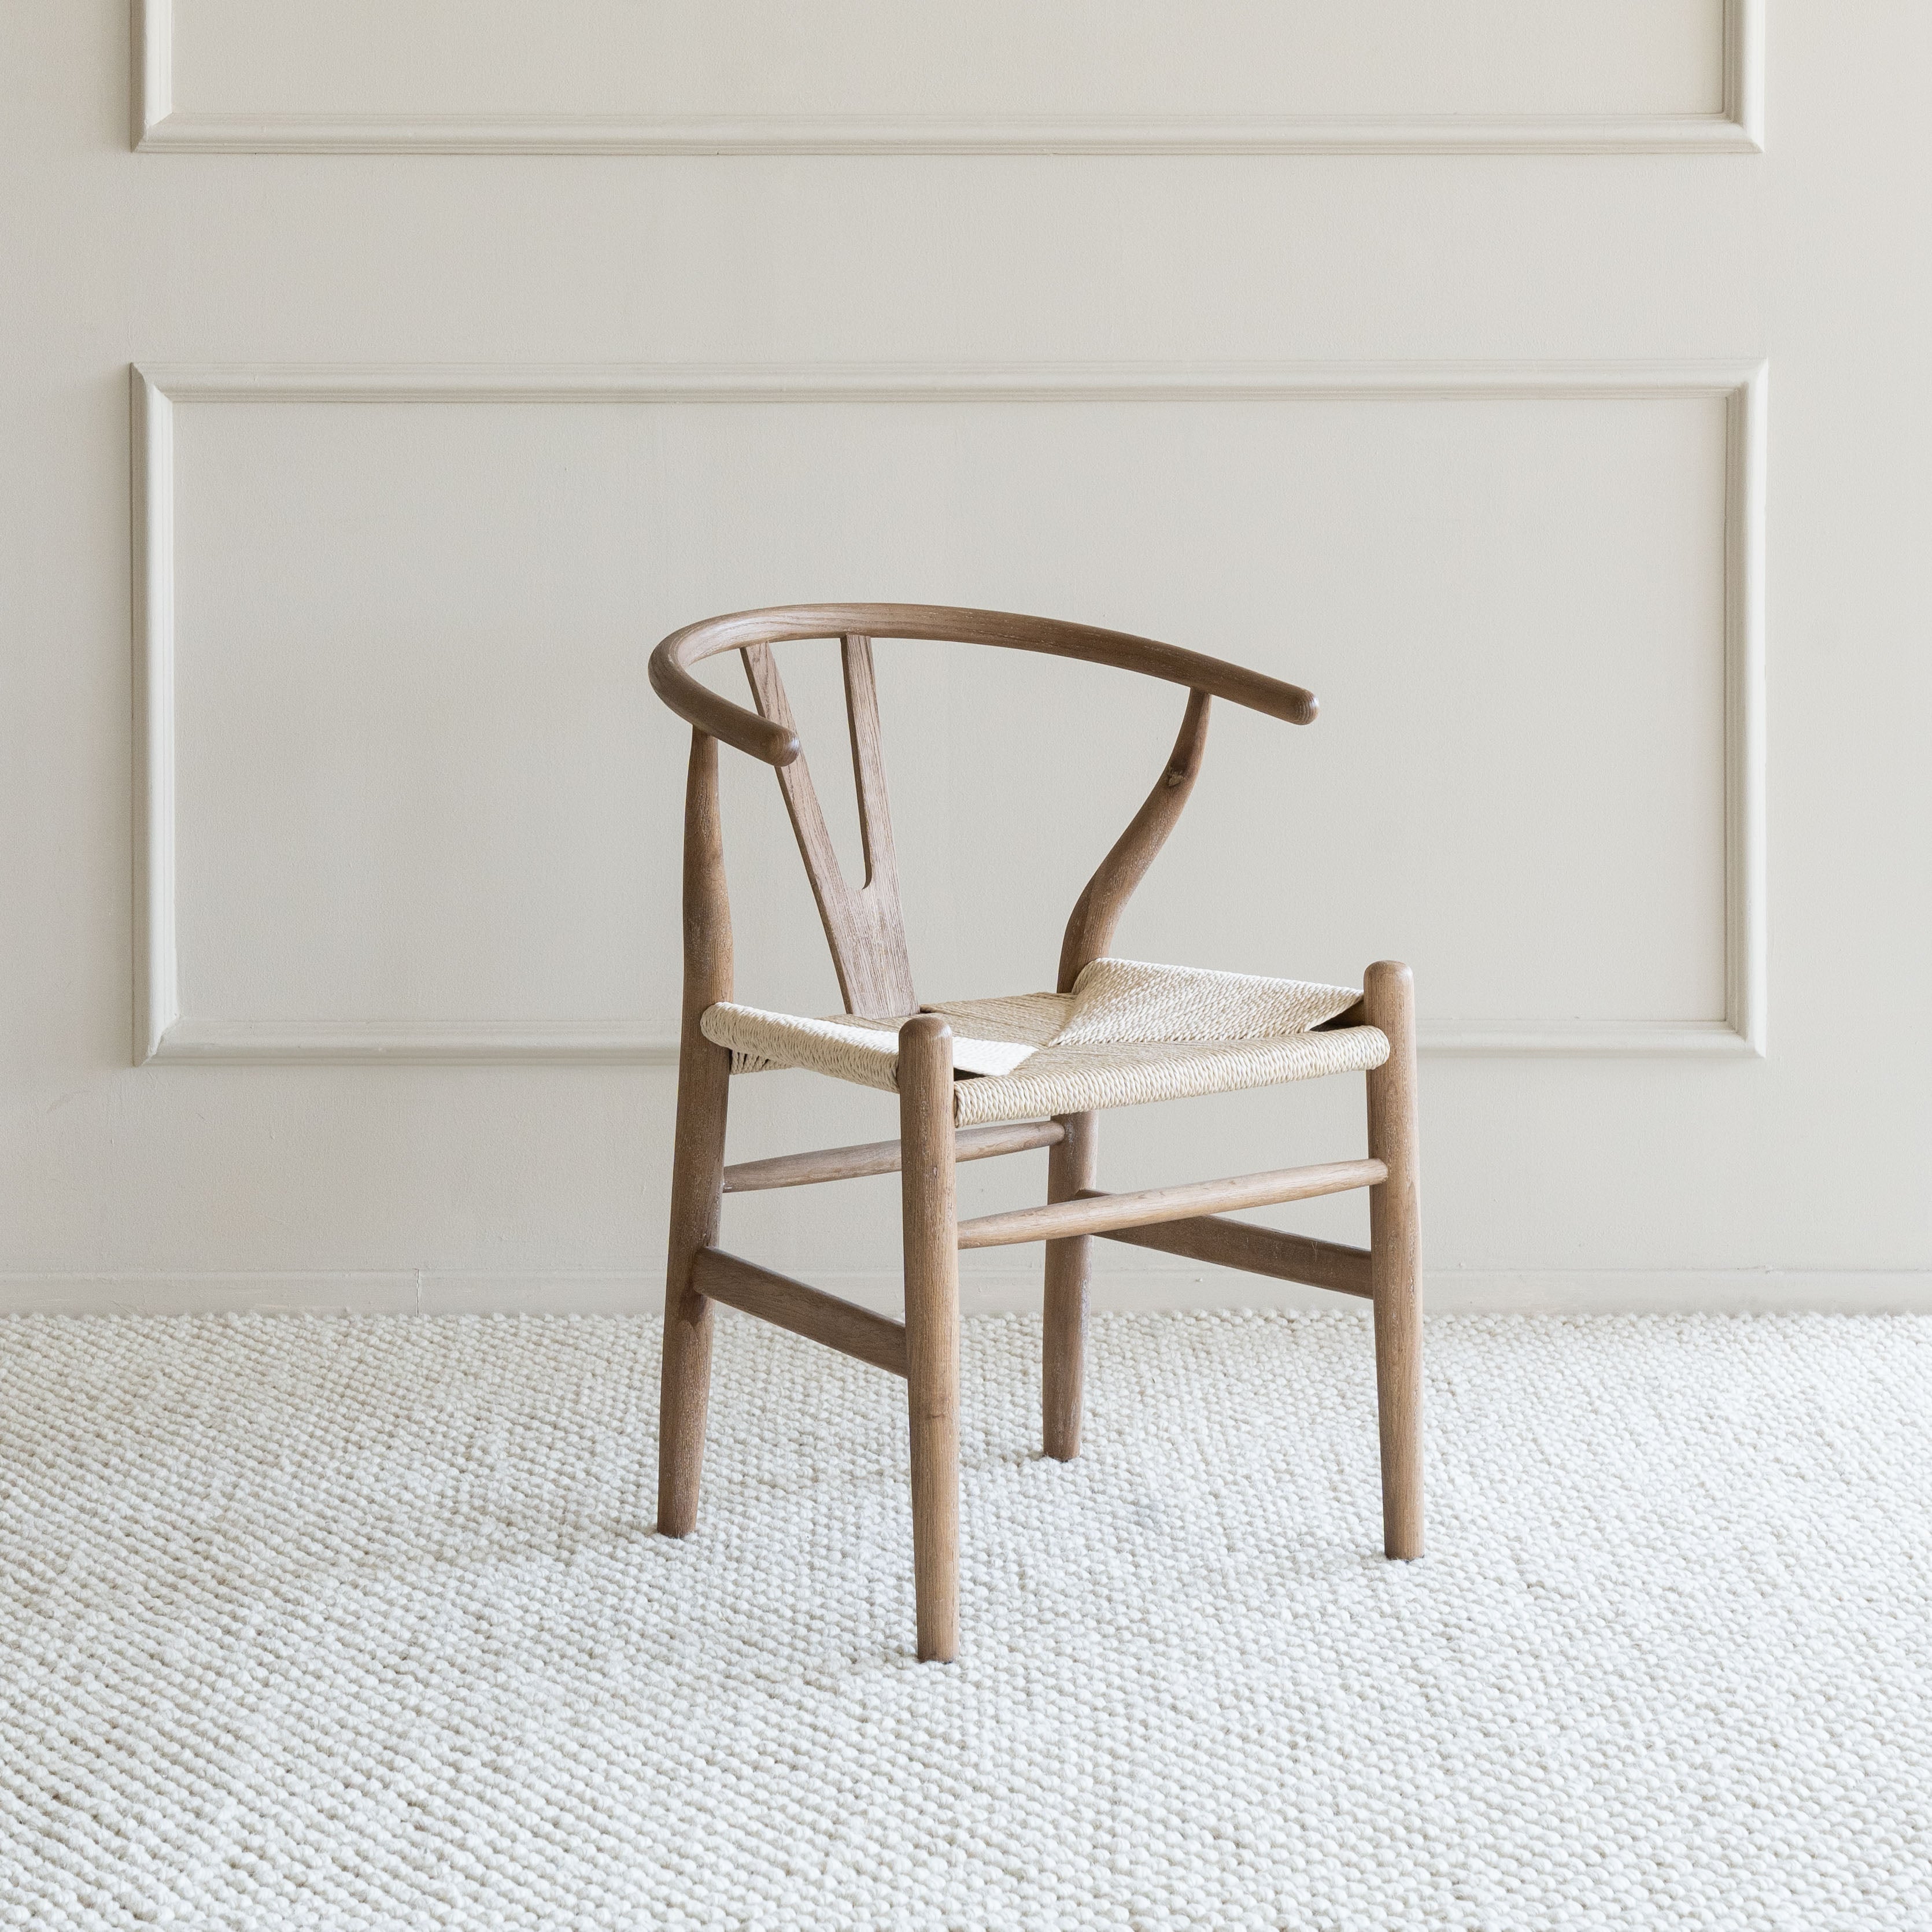 Wishbone Chair(s) - Wood and Steel Furnitures